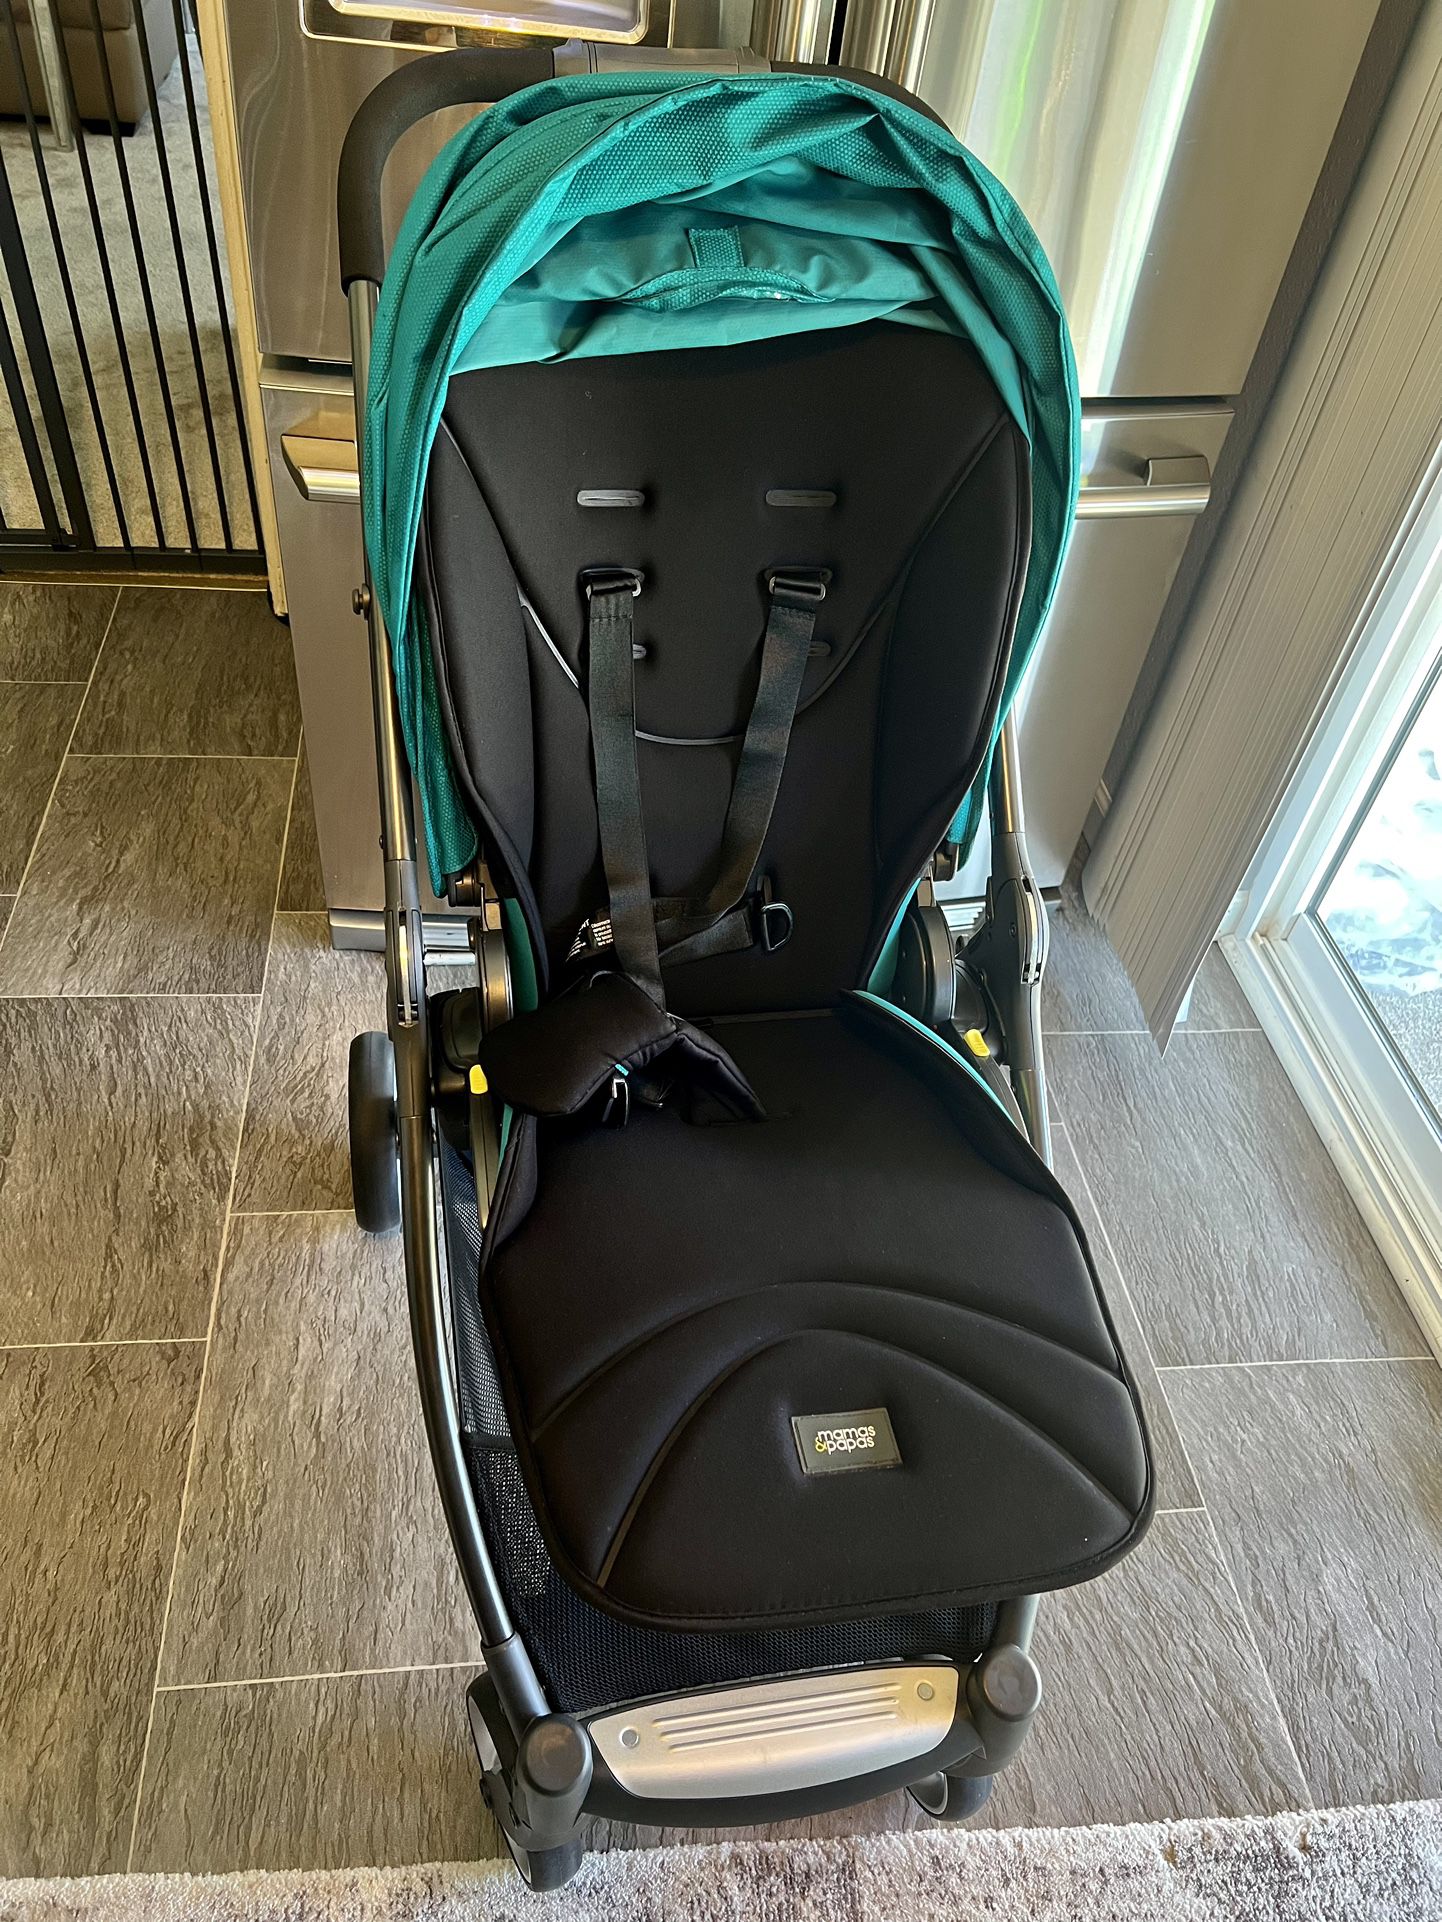 Mamas & Papas Armadillo Stroller  Excellent Condition Smoke And Pets Free Home Seriously Buyers Only Please Check My Other Posts Thank 